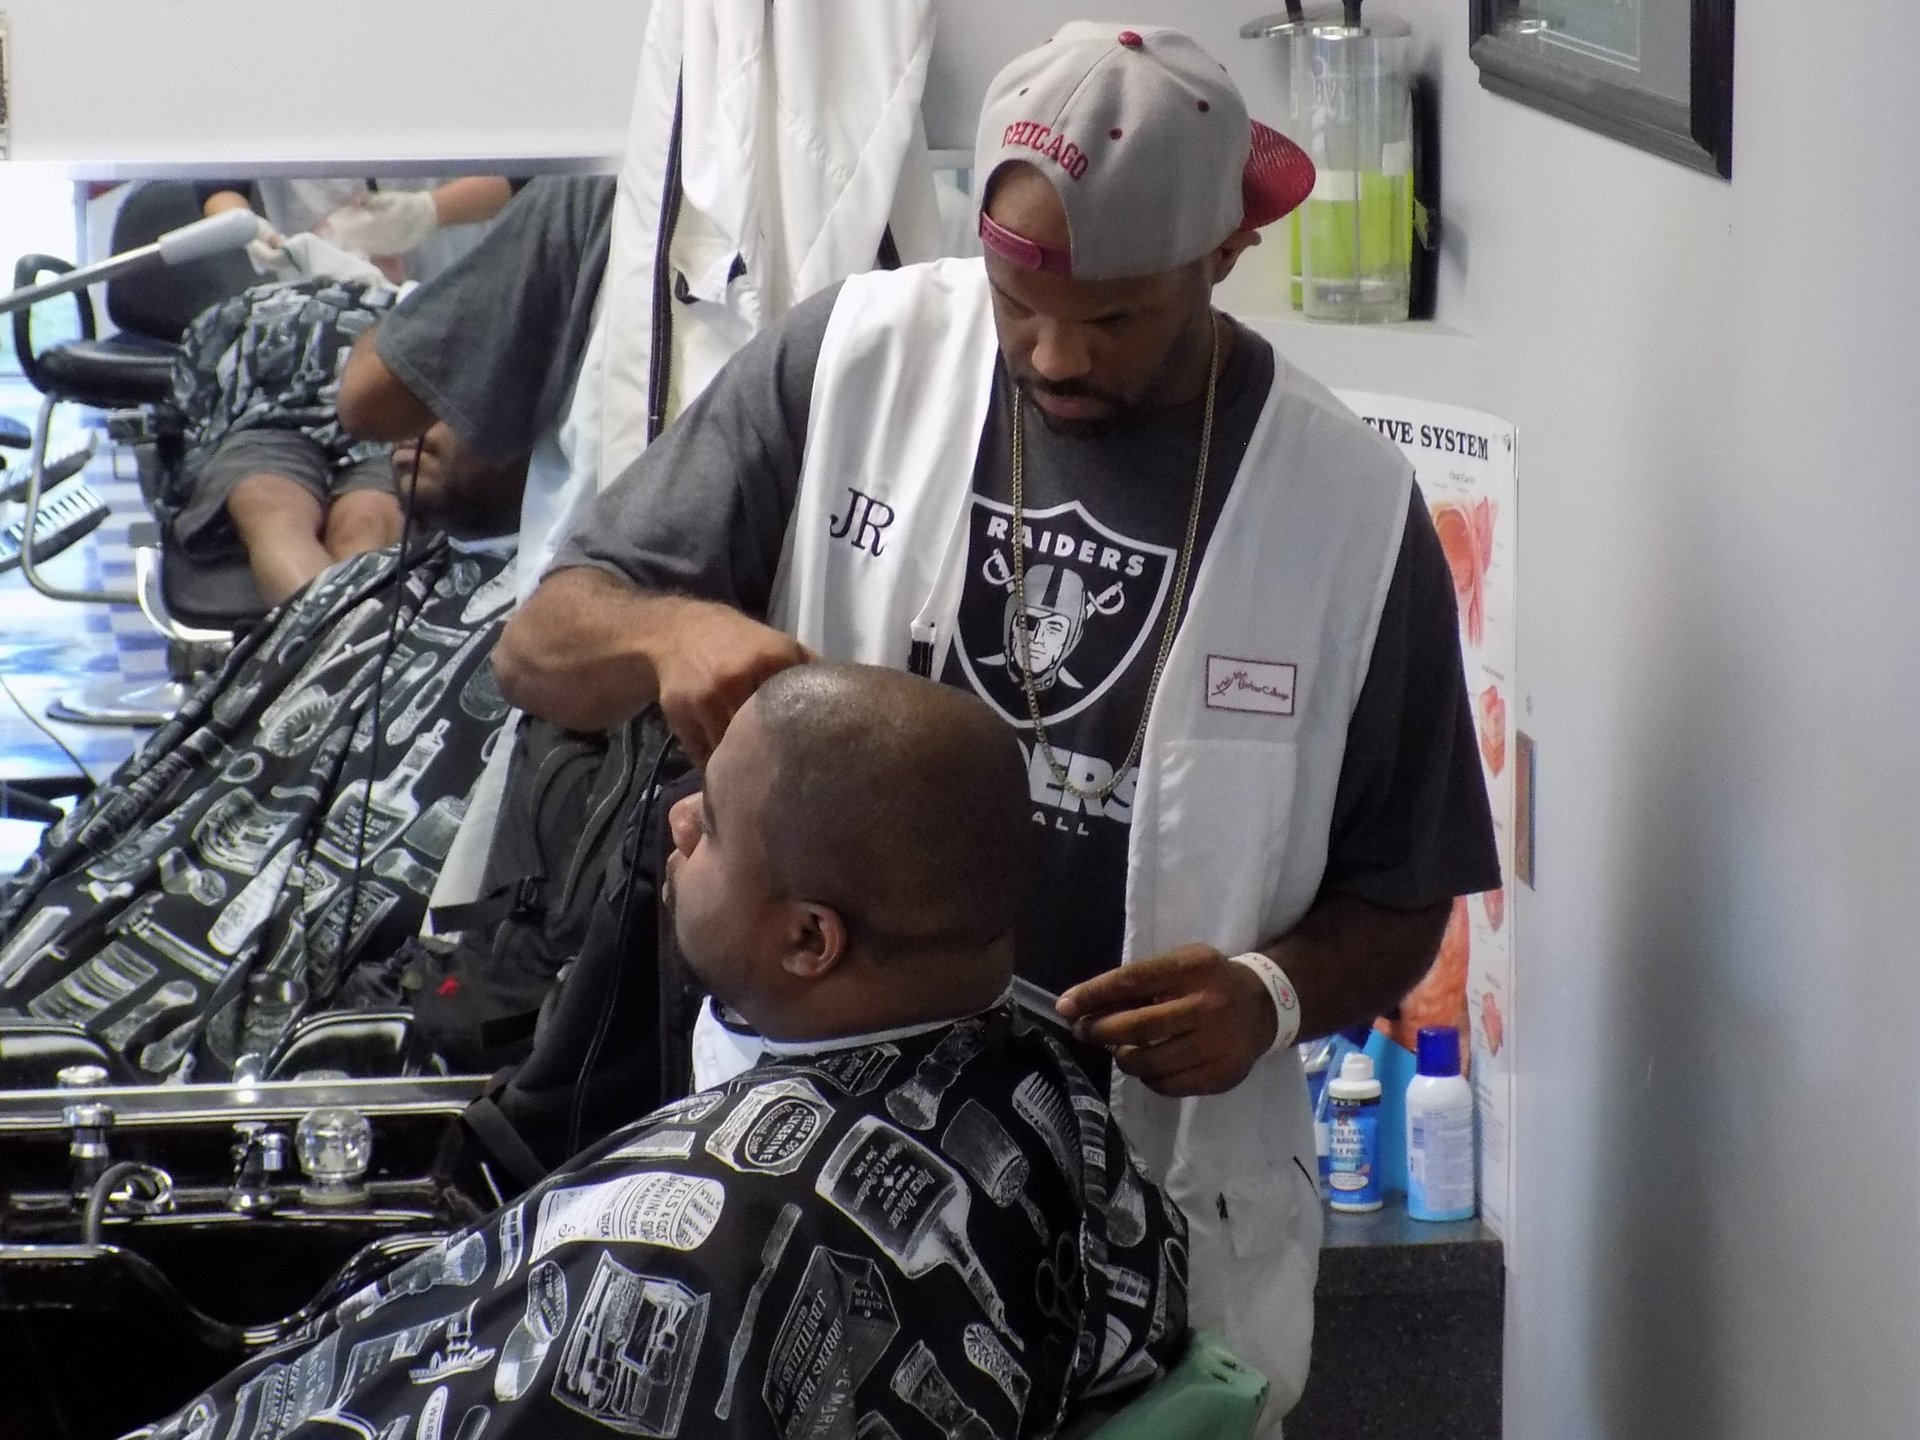 MidWest Barber College | 901 SW 37th St, Topeka, KS, 66611 | +1 (785) 266-2500